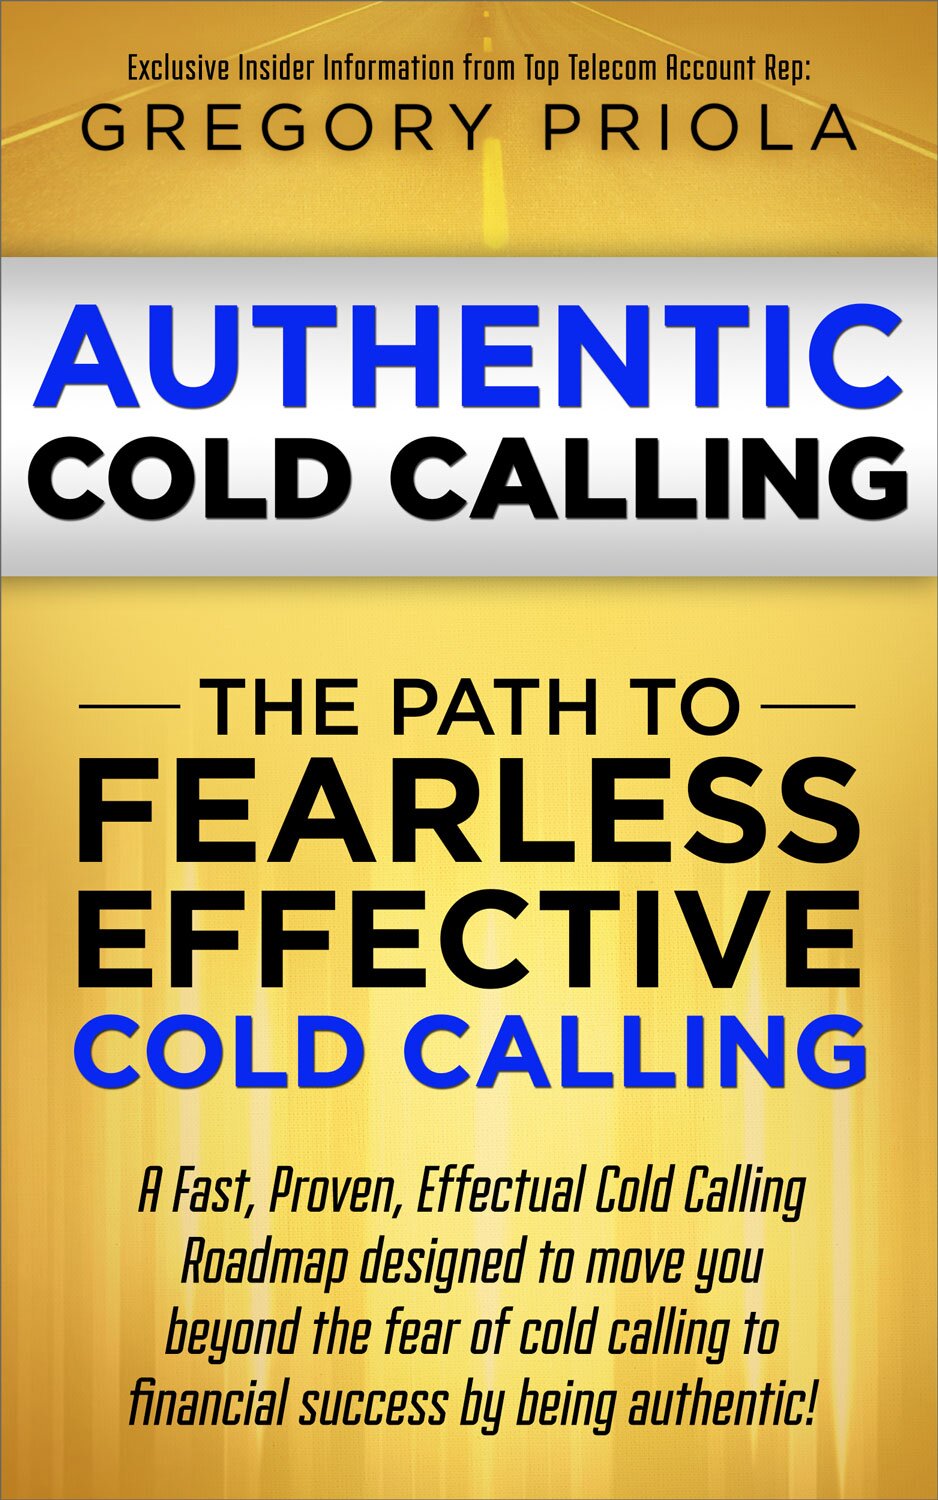 If you don't learn to love cold calling by practicing these principles you will definitely come away loving cold calling more than you hate having no new biz.